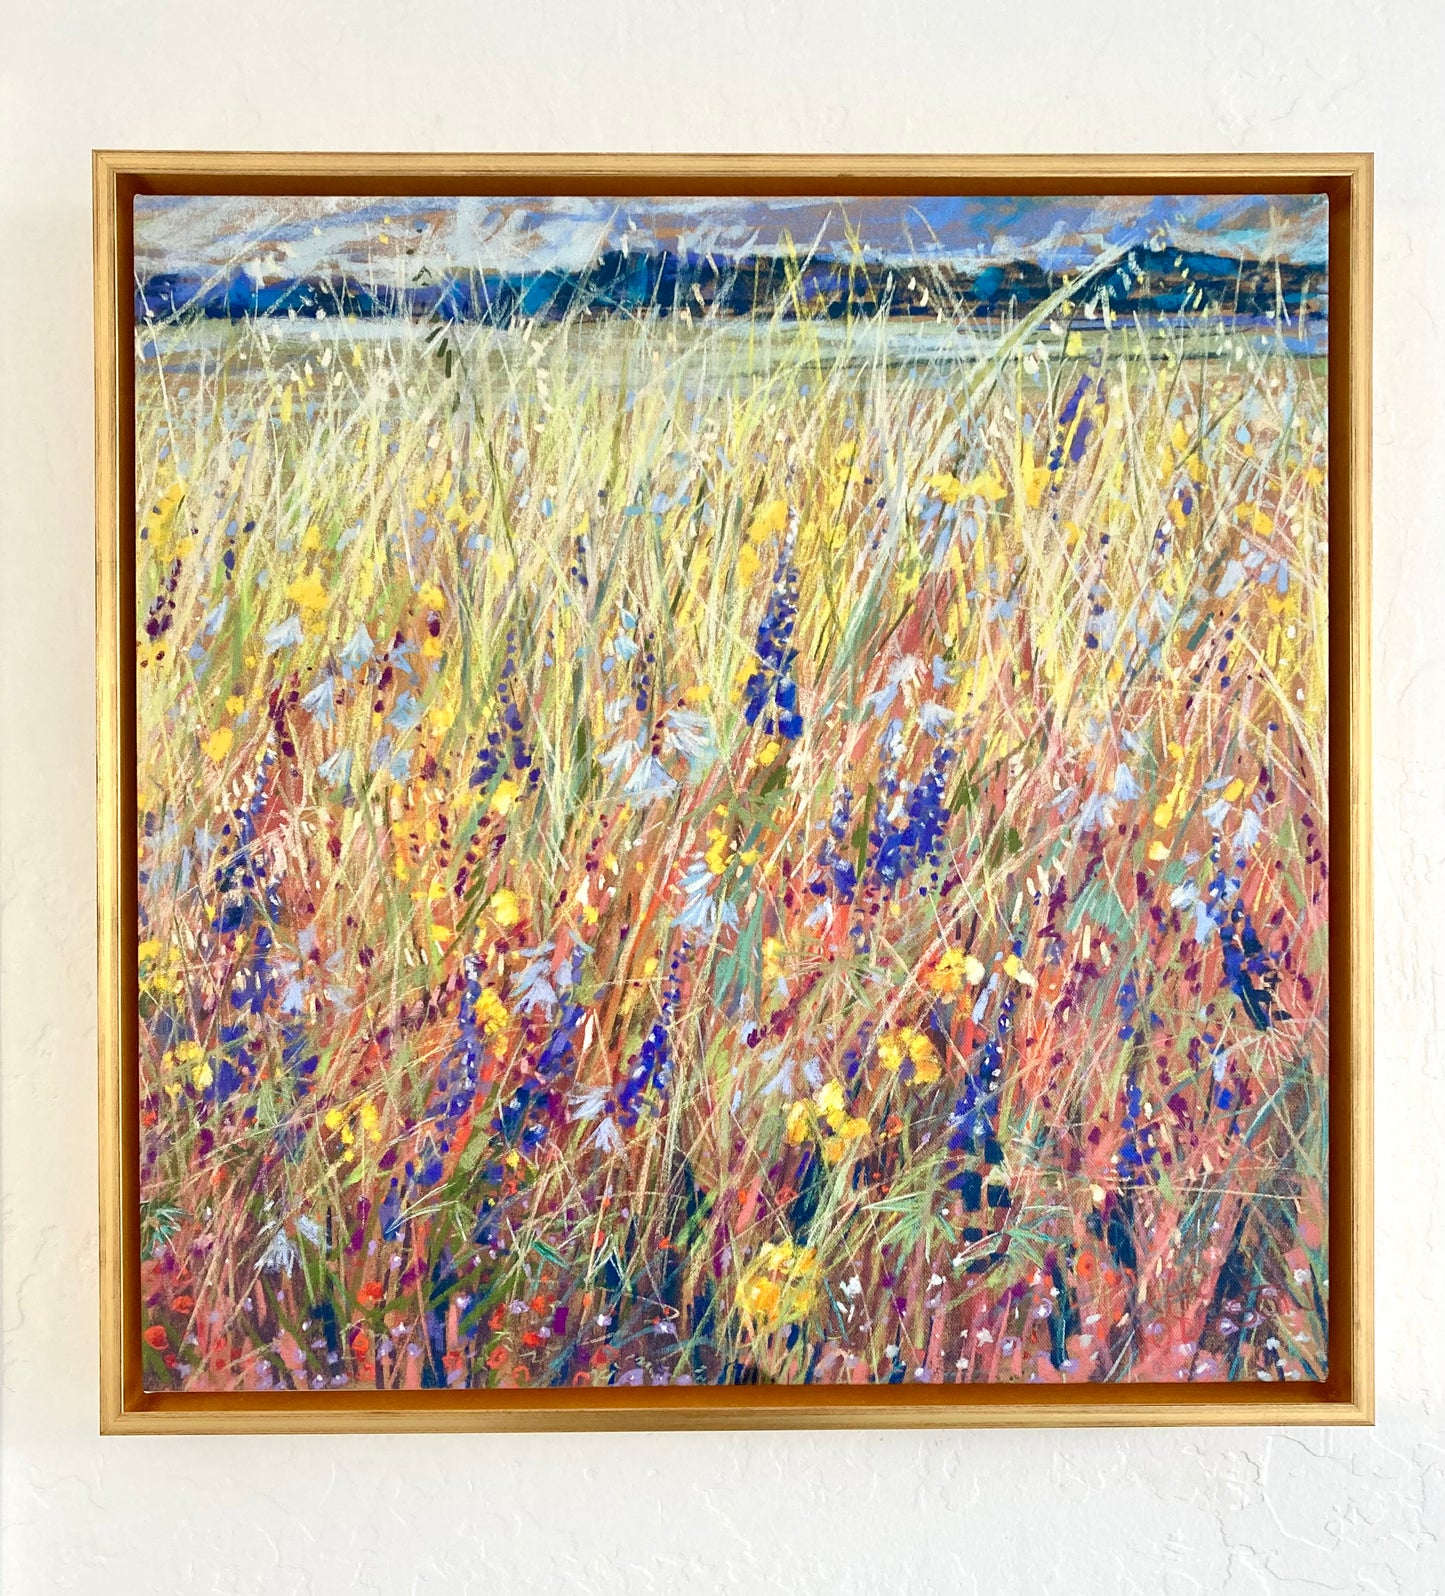 Square version of Essence of Spring with example gold frloat frame.